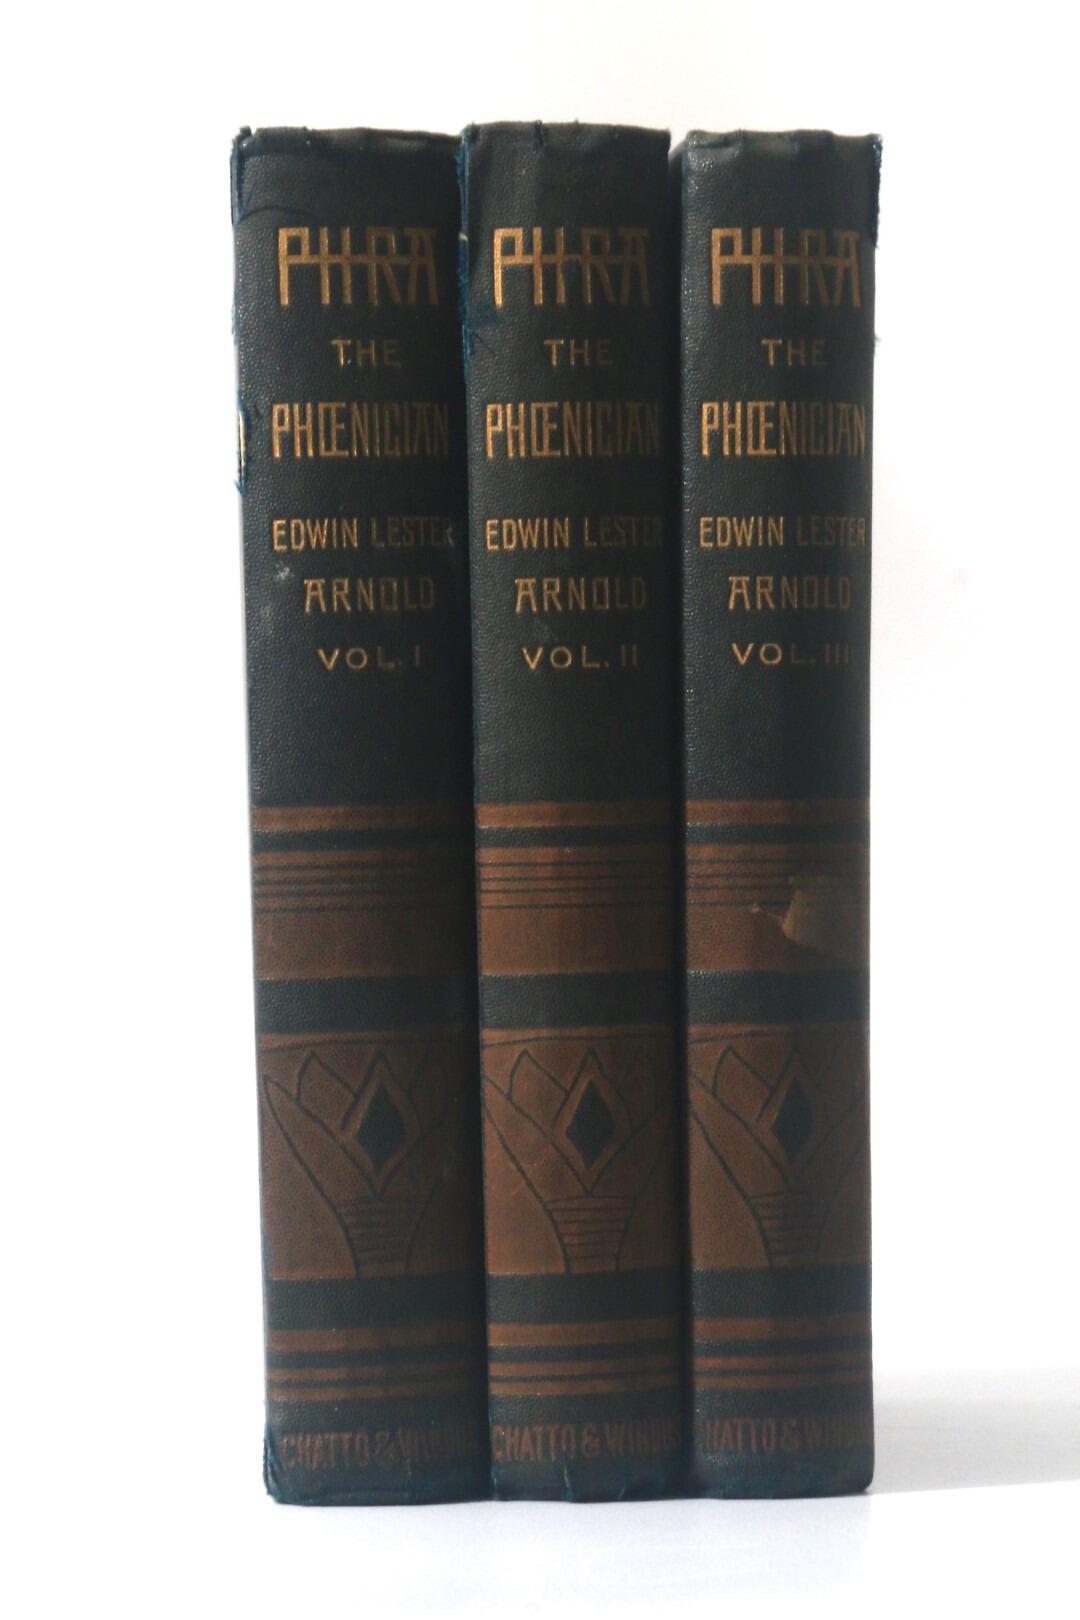 Edwin Lester Arnold - The Wonderful Adventures of Phra the Phoenician - Chatto & Windus, 1891 [1890], First Edition.